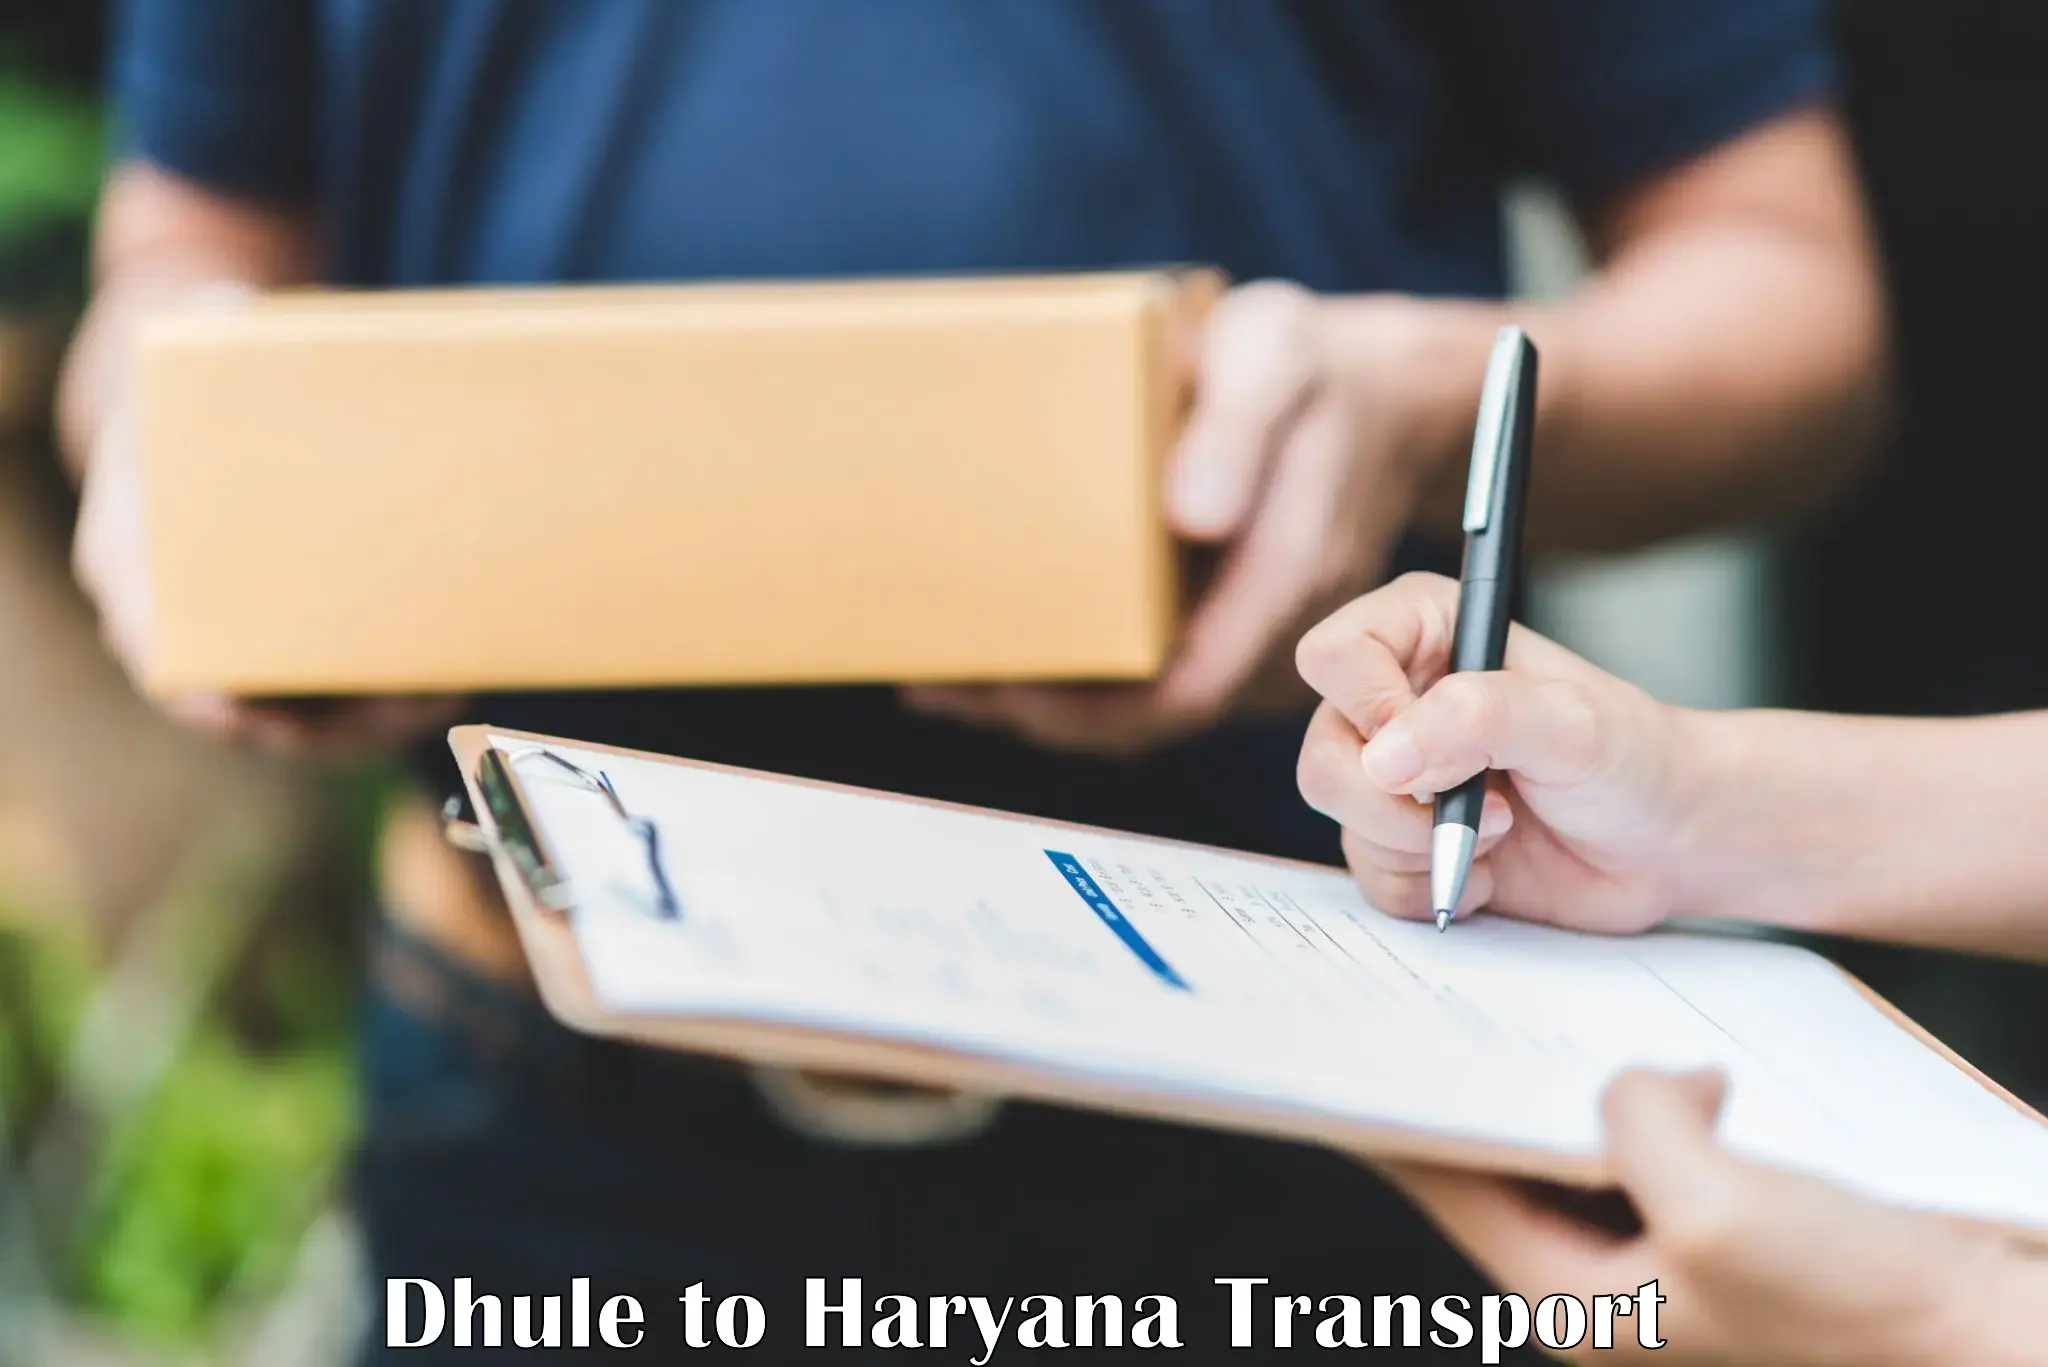 Daily transport service Dhule to Bhuna